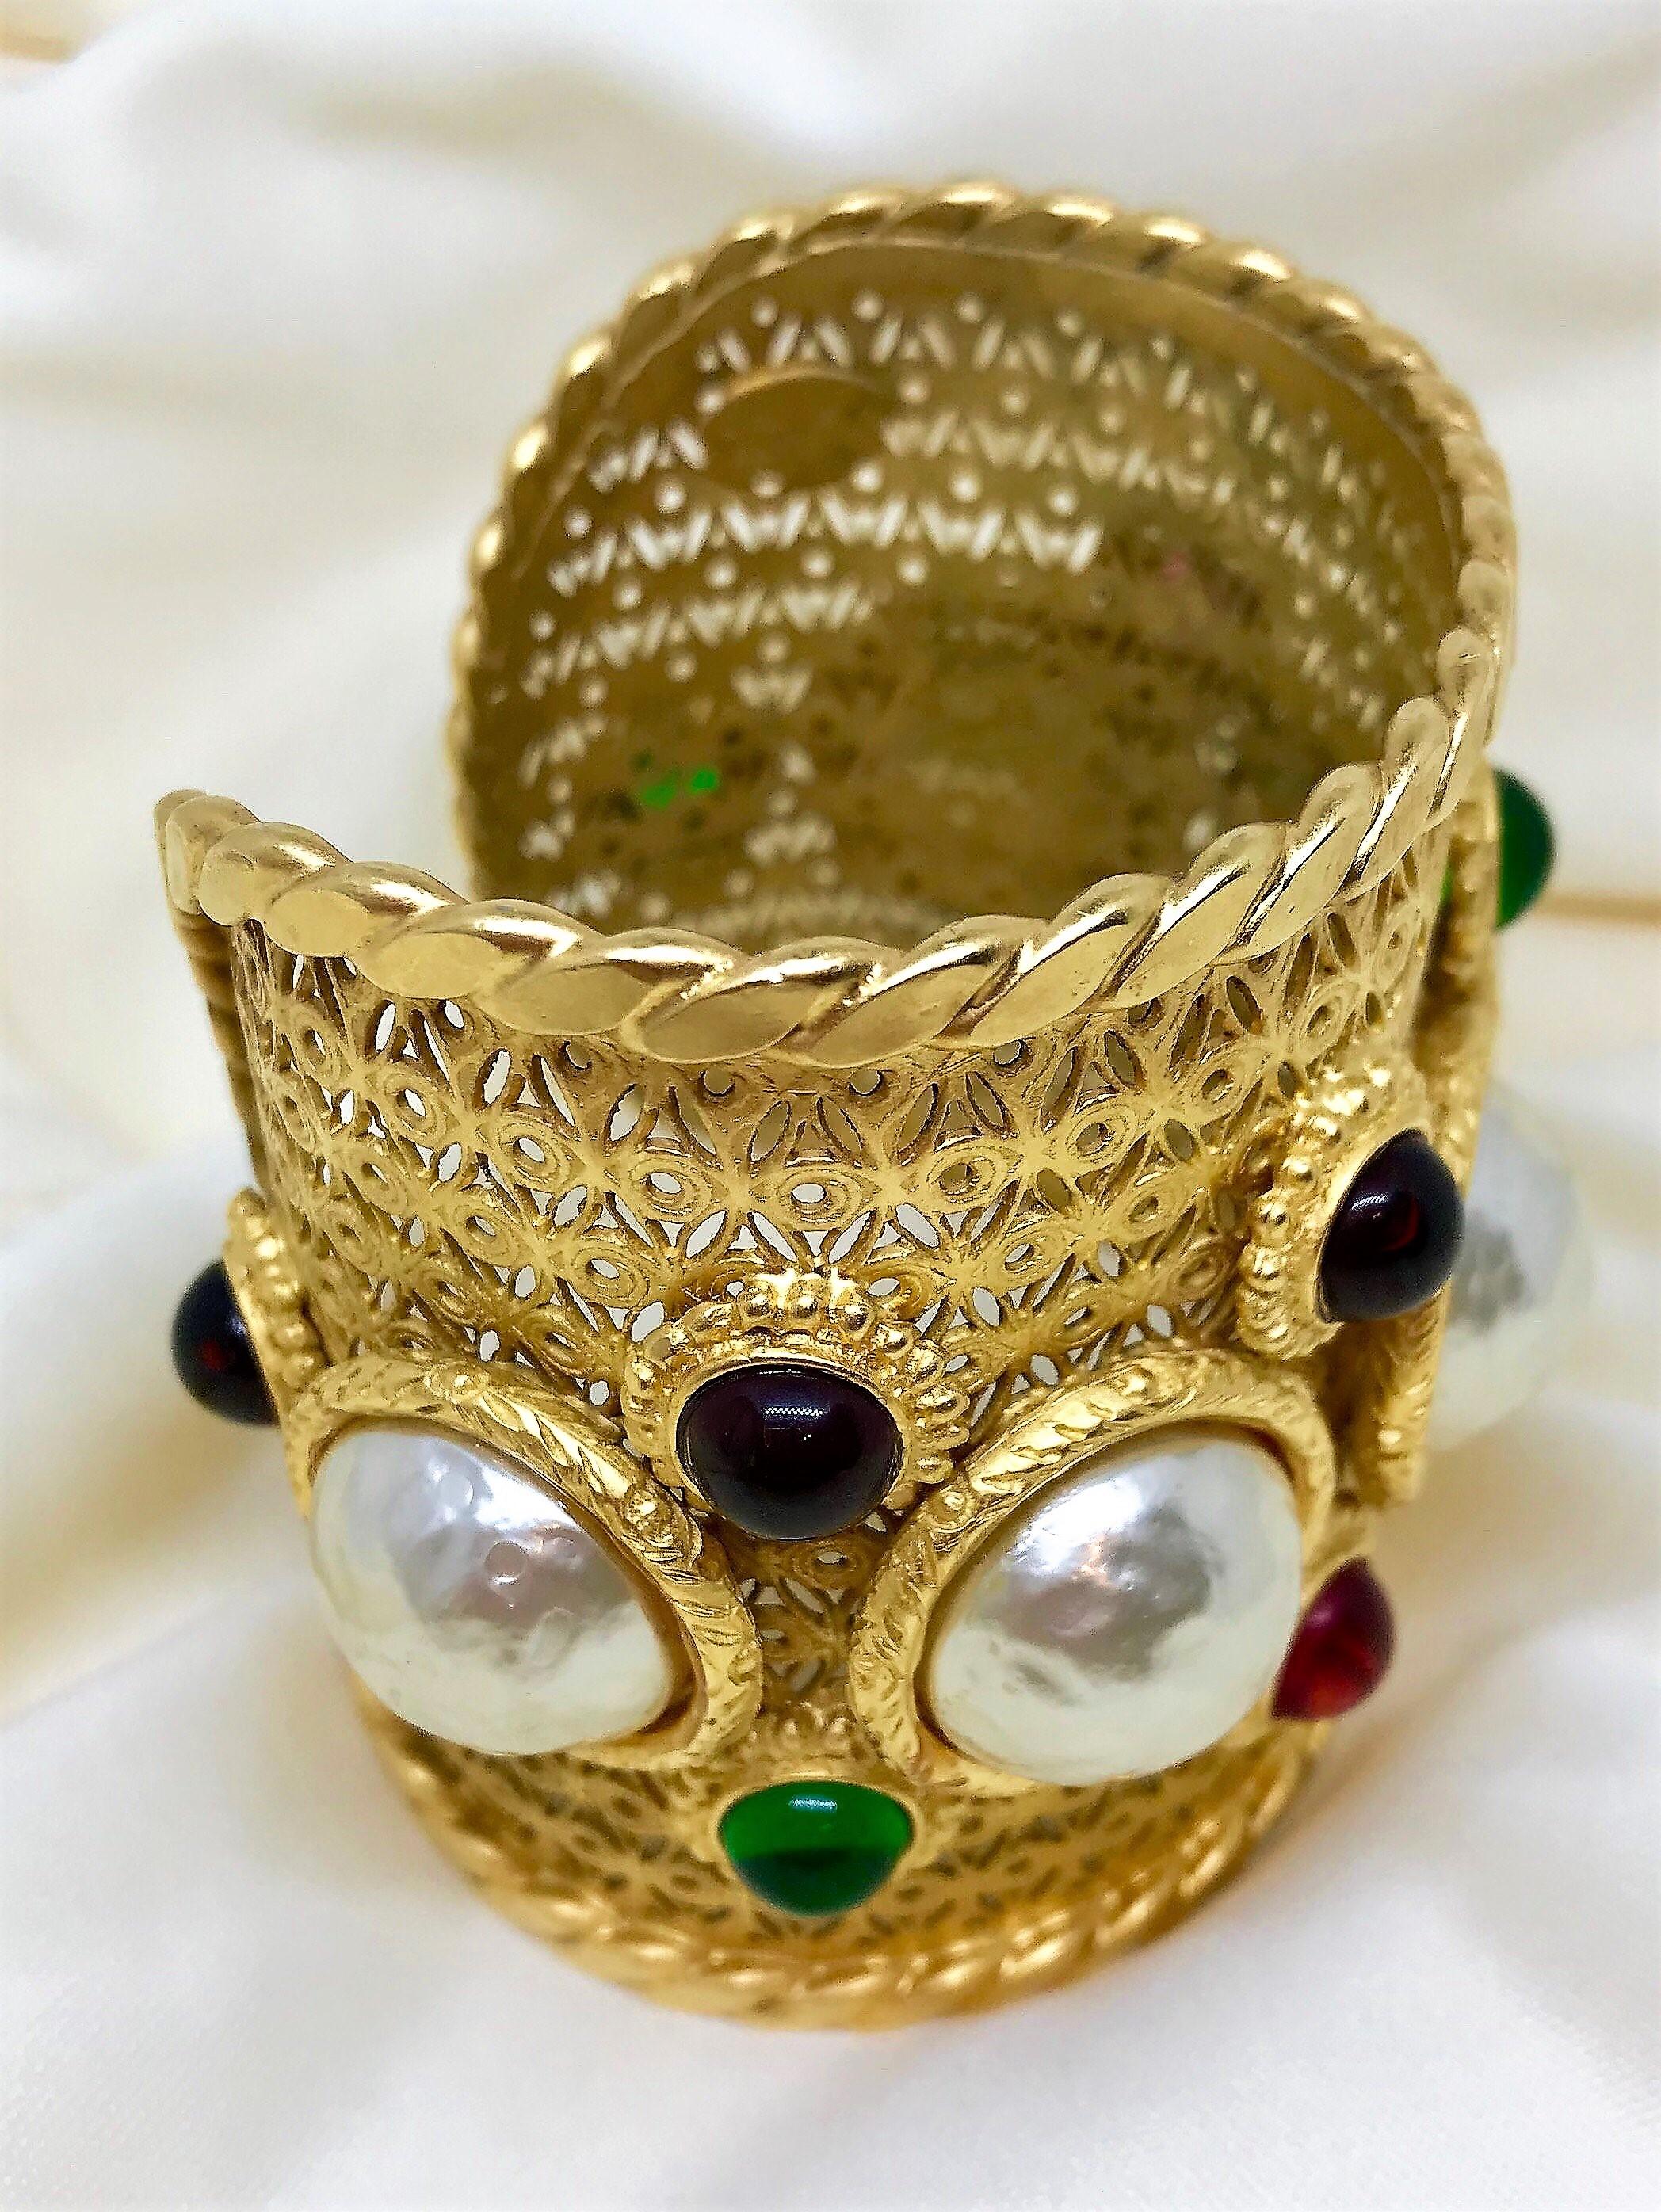 Circa 1980s Deanna Hamro Gold-Plated Faux-Pearl and  Cabochon Jeweled Cuff  1